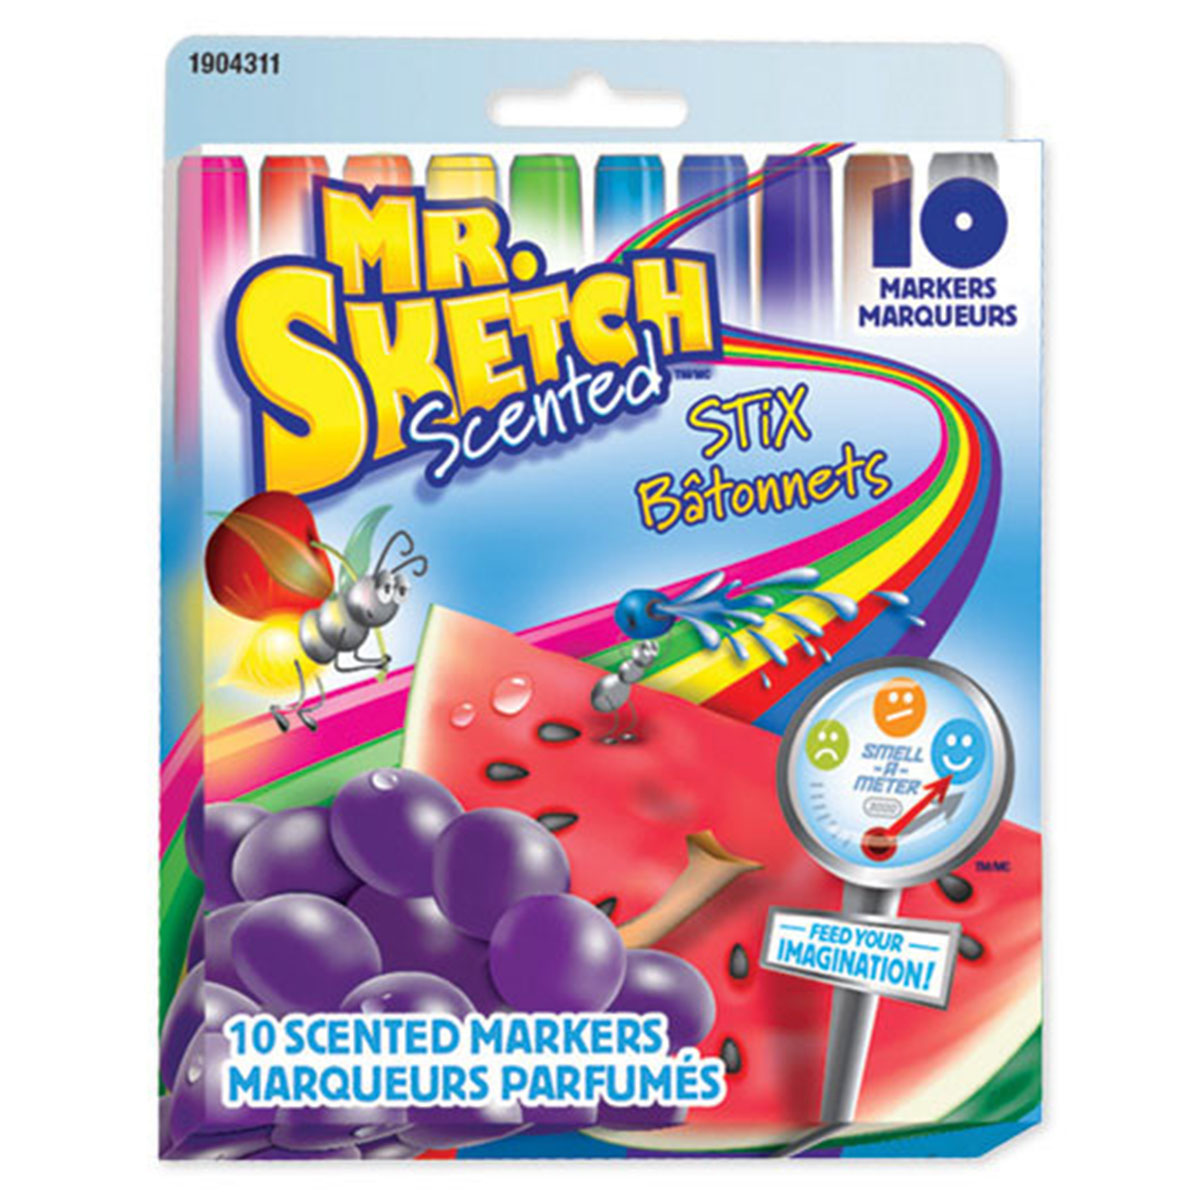  Mr. Sketch Scented Markers Scented Stix 